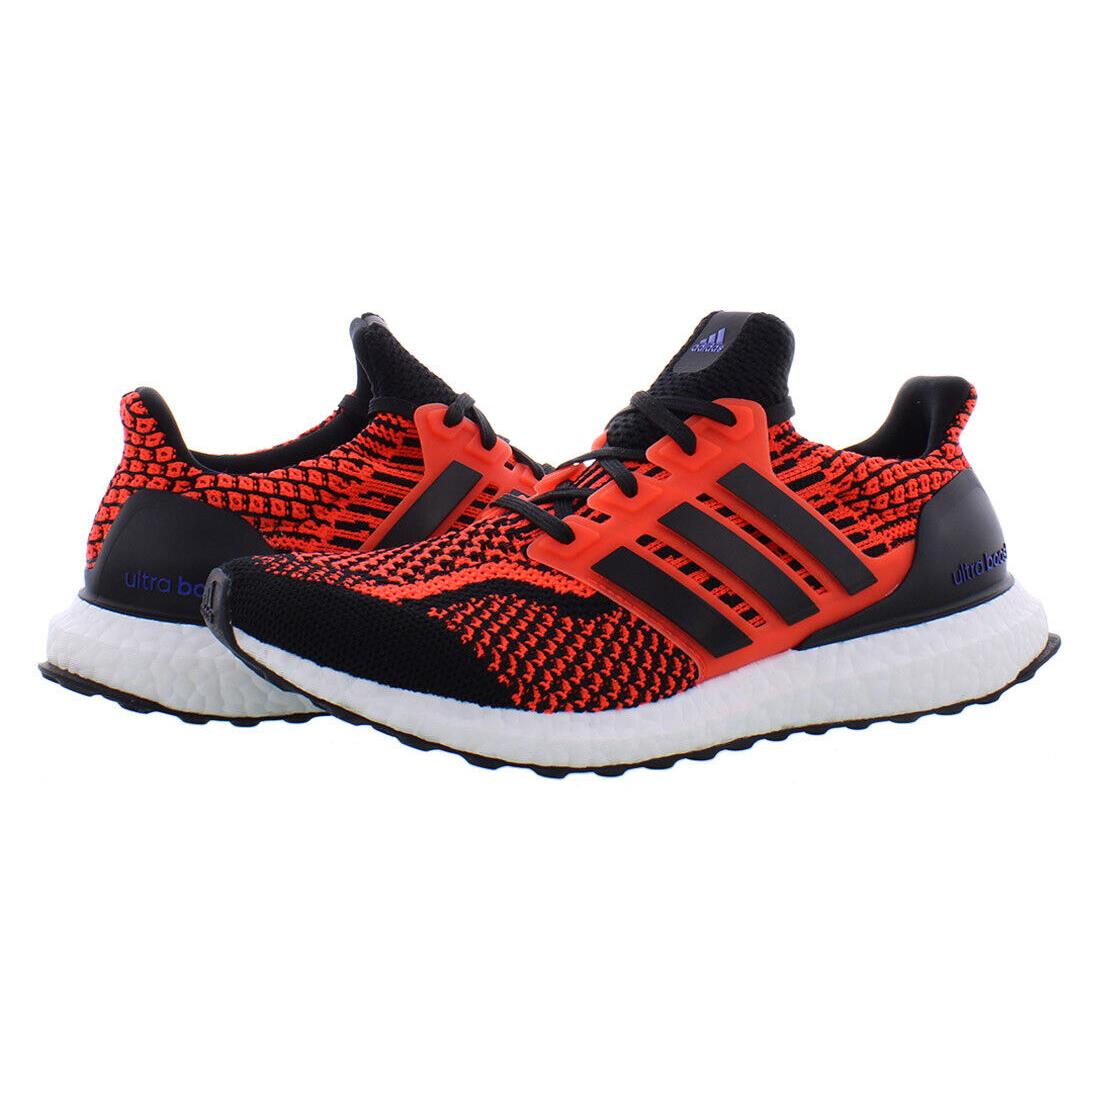 Adidas Ultraboost 5.0 Dna Mens Shoes - Red/Black, Main: Red